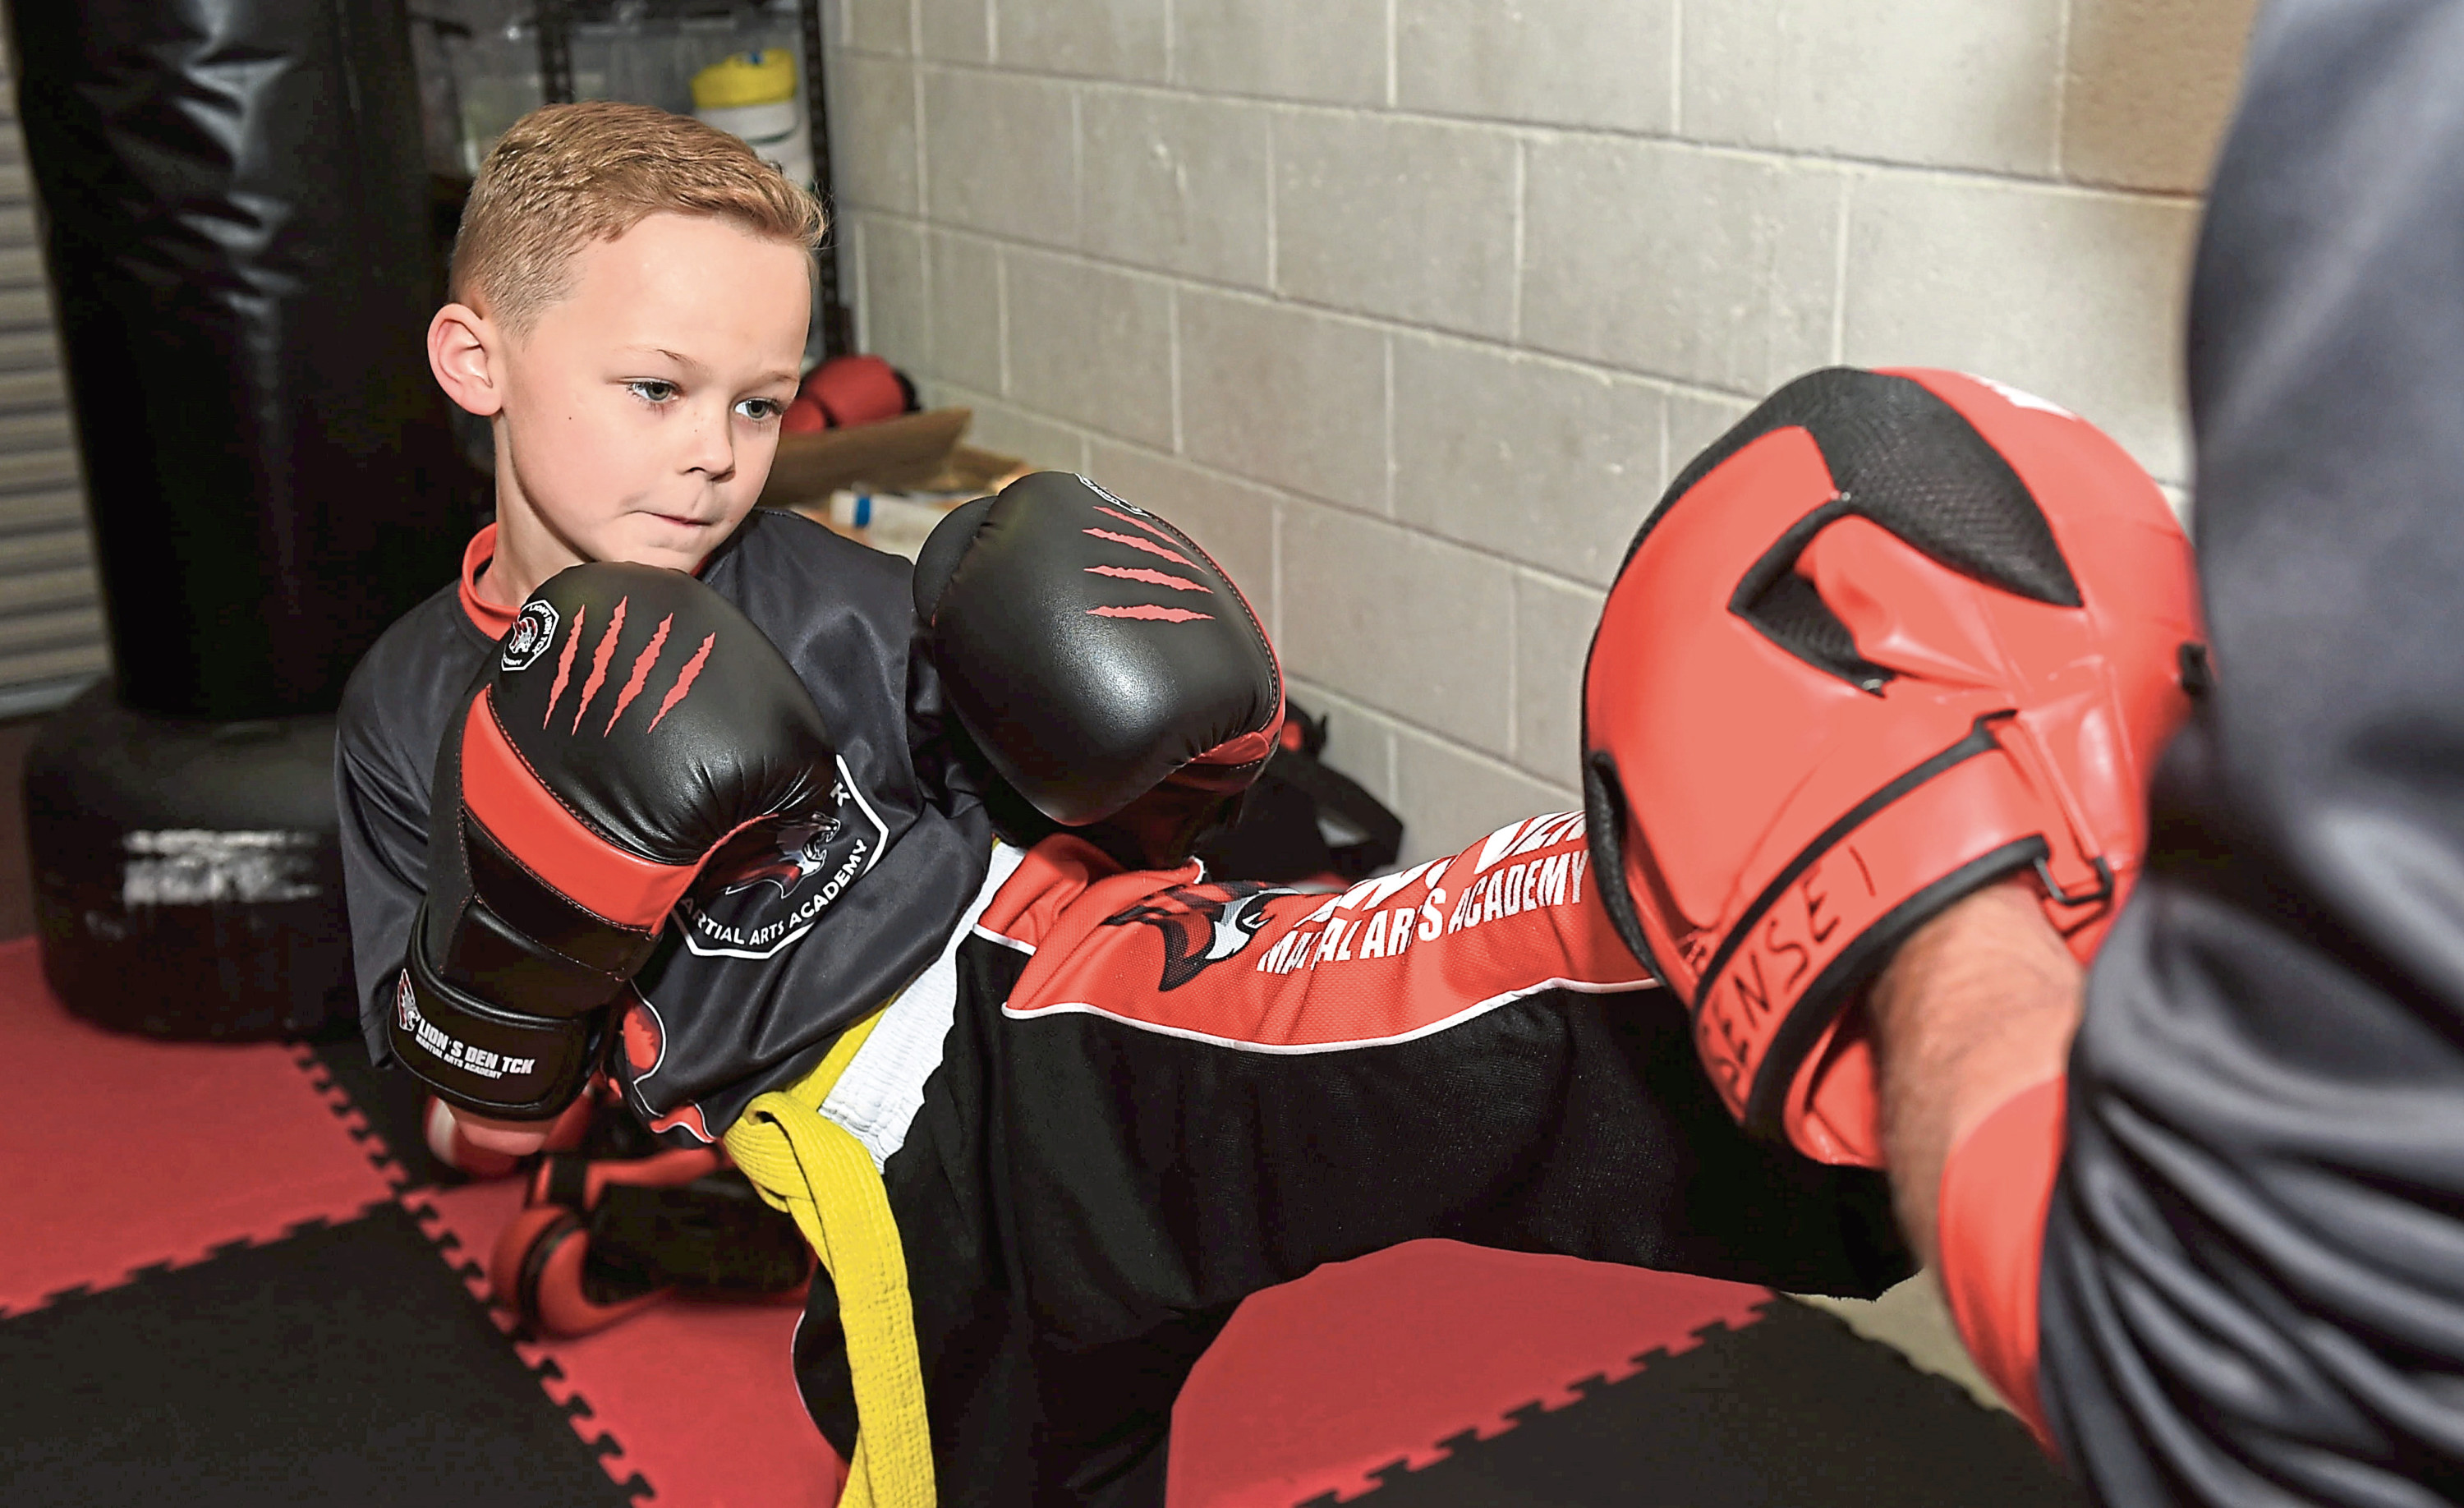 7-year-old Lachlan Blaikie who has just returned from winning a bronze medal in the World Karate & Kickboxing Commission World Championships in Dublin.
 Pictured are Lachlan Blaikie, 7 years old.
21/11/18
Picture by HEATHER FOWLIE